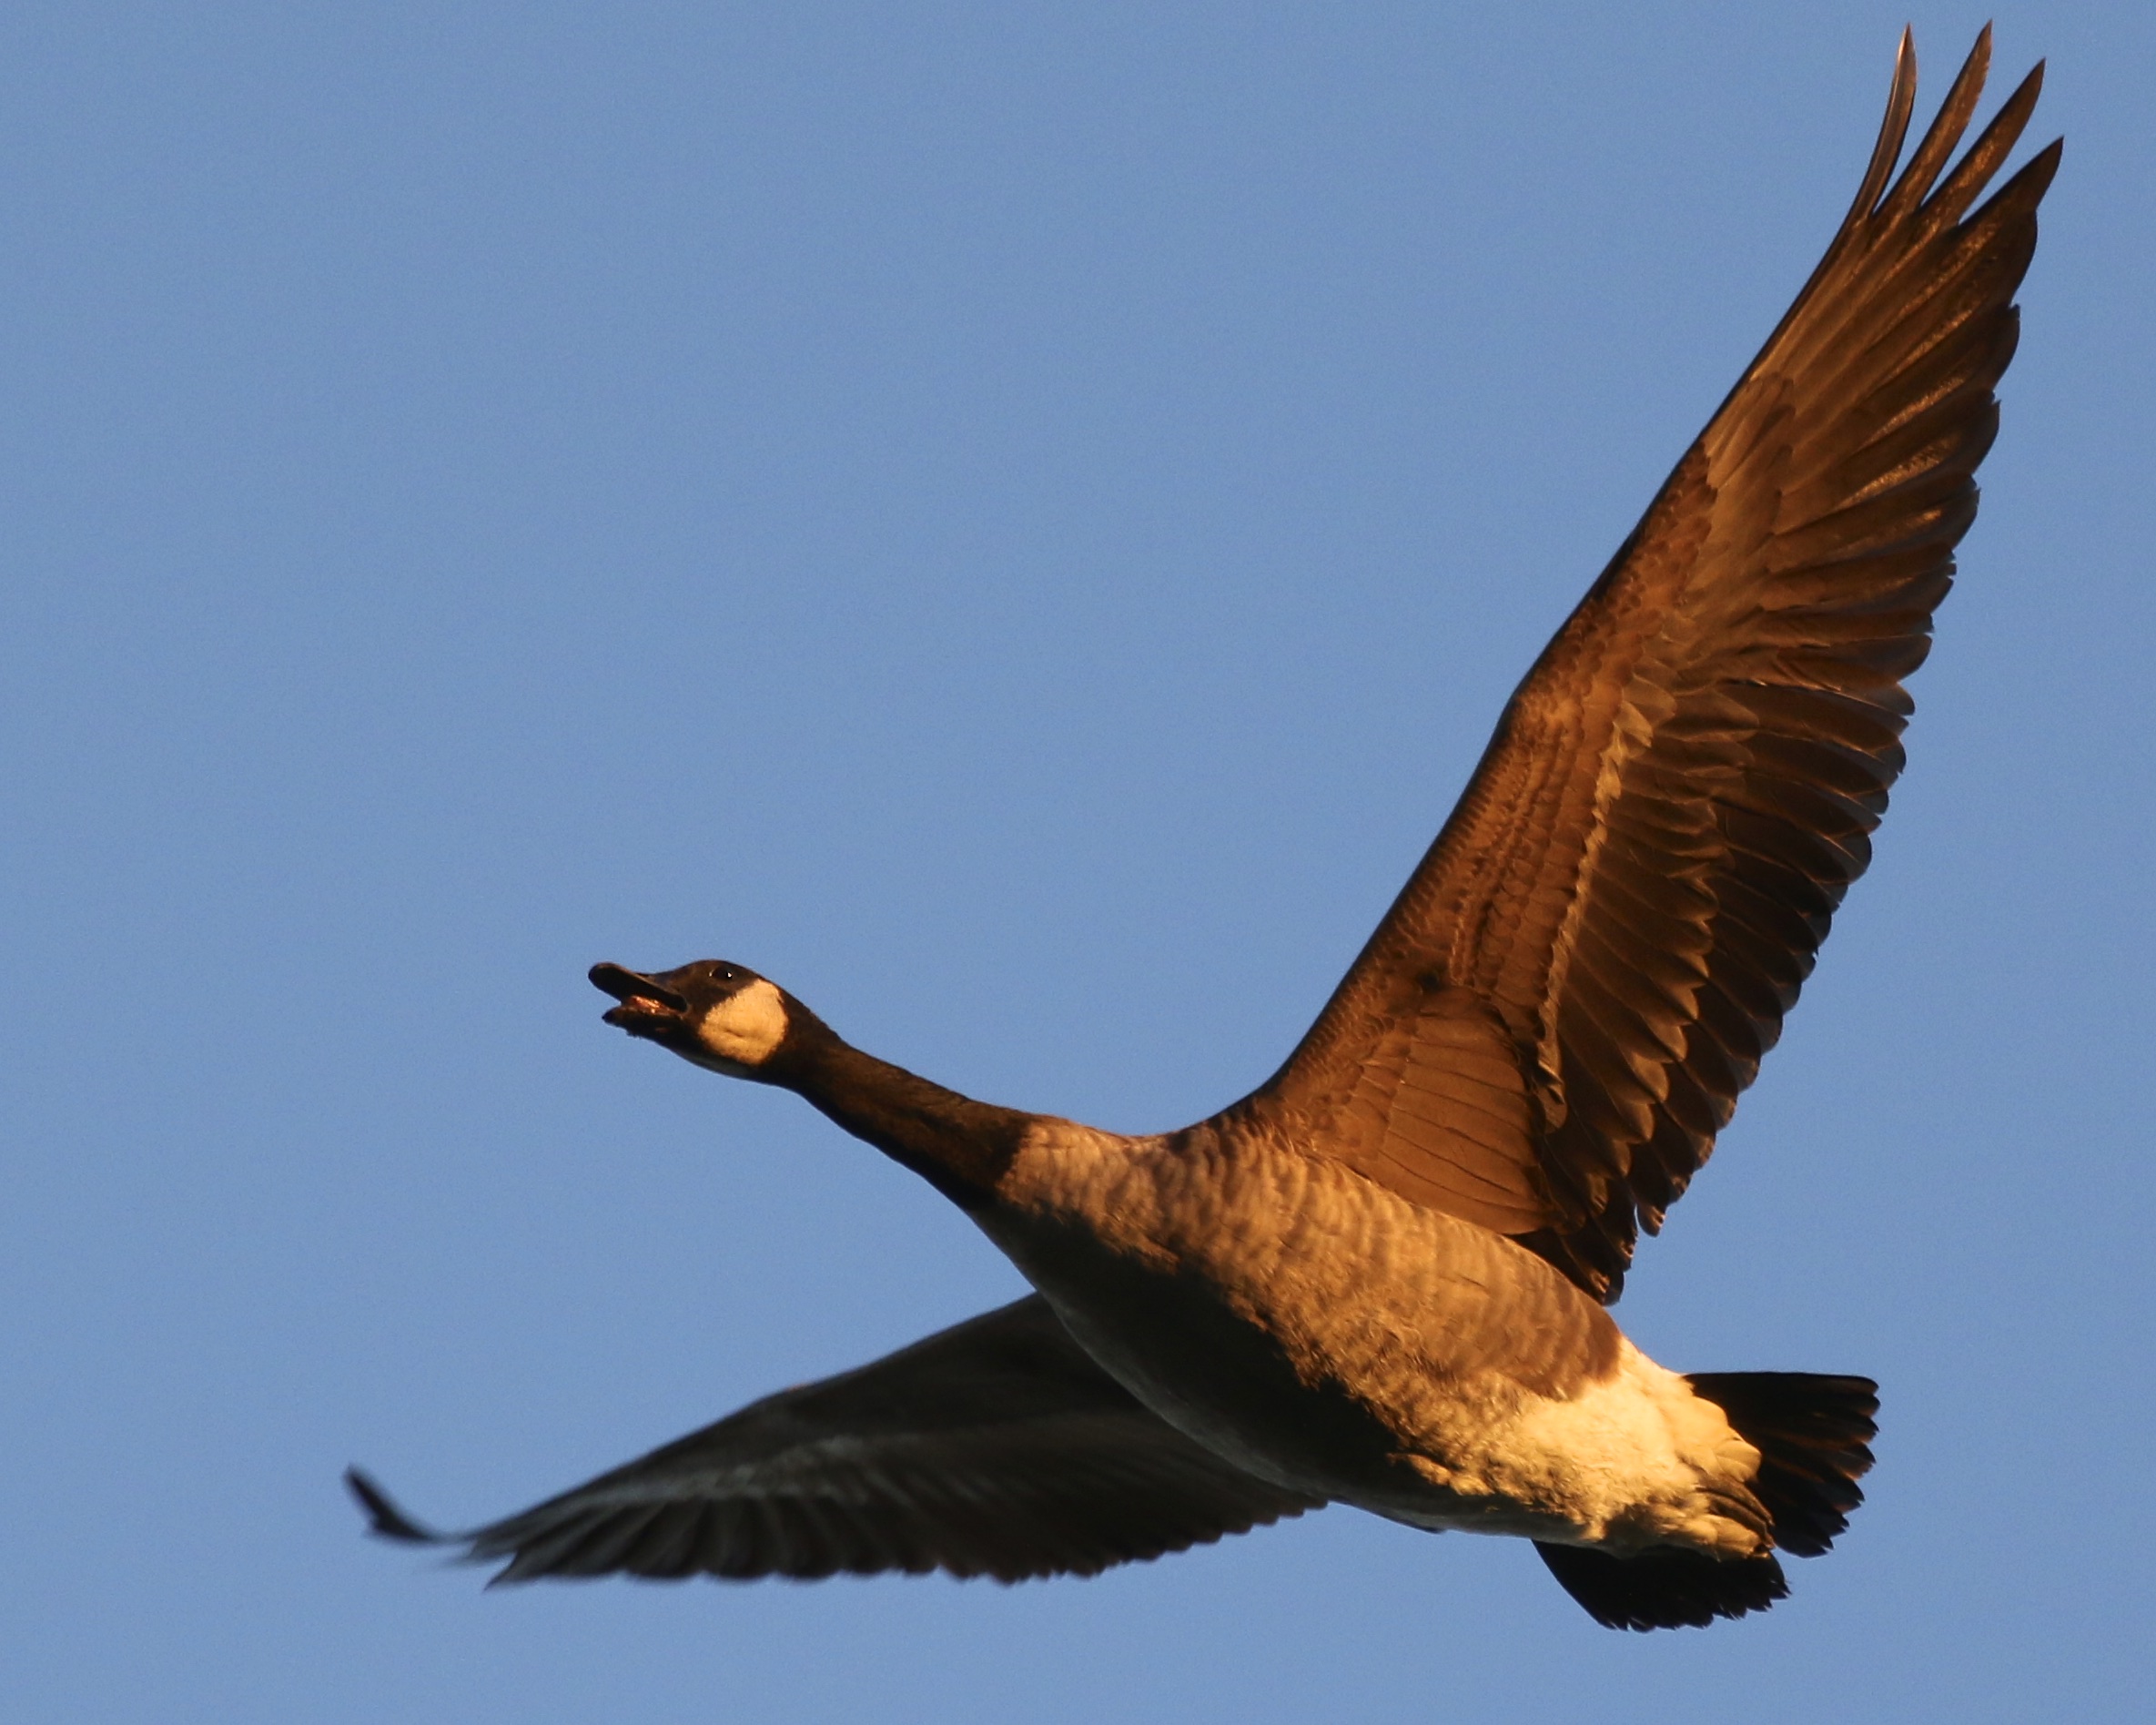 A flying, calling Canada Goose comes in for a landing. Black Dirt Region, 11/18/14. 